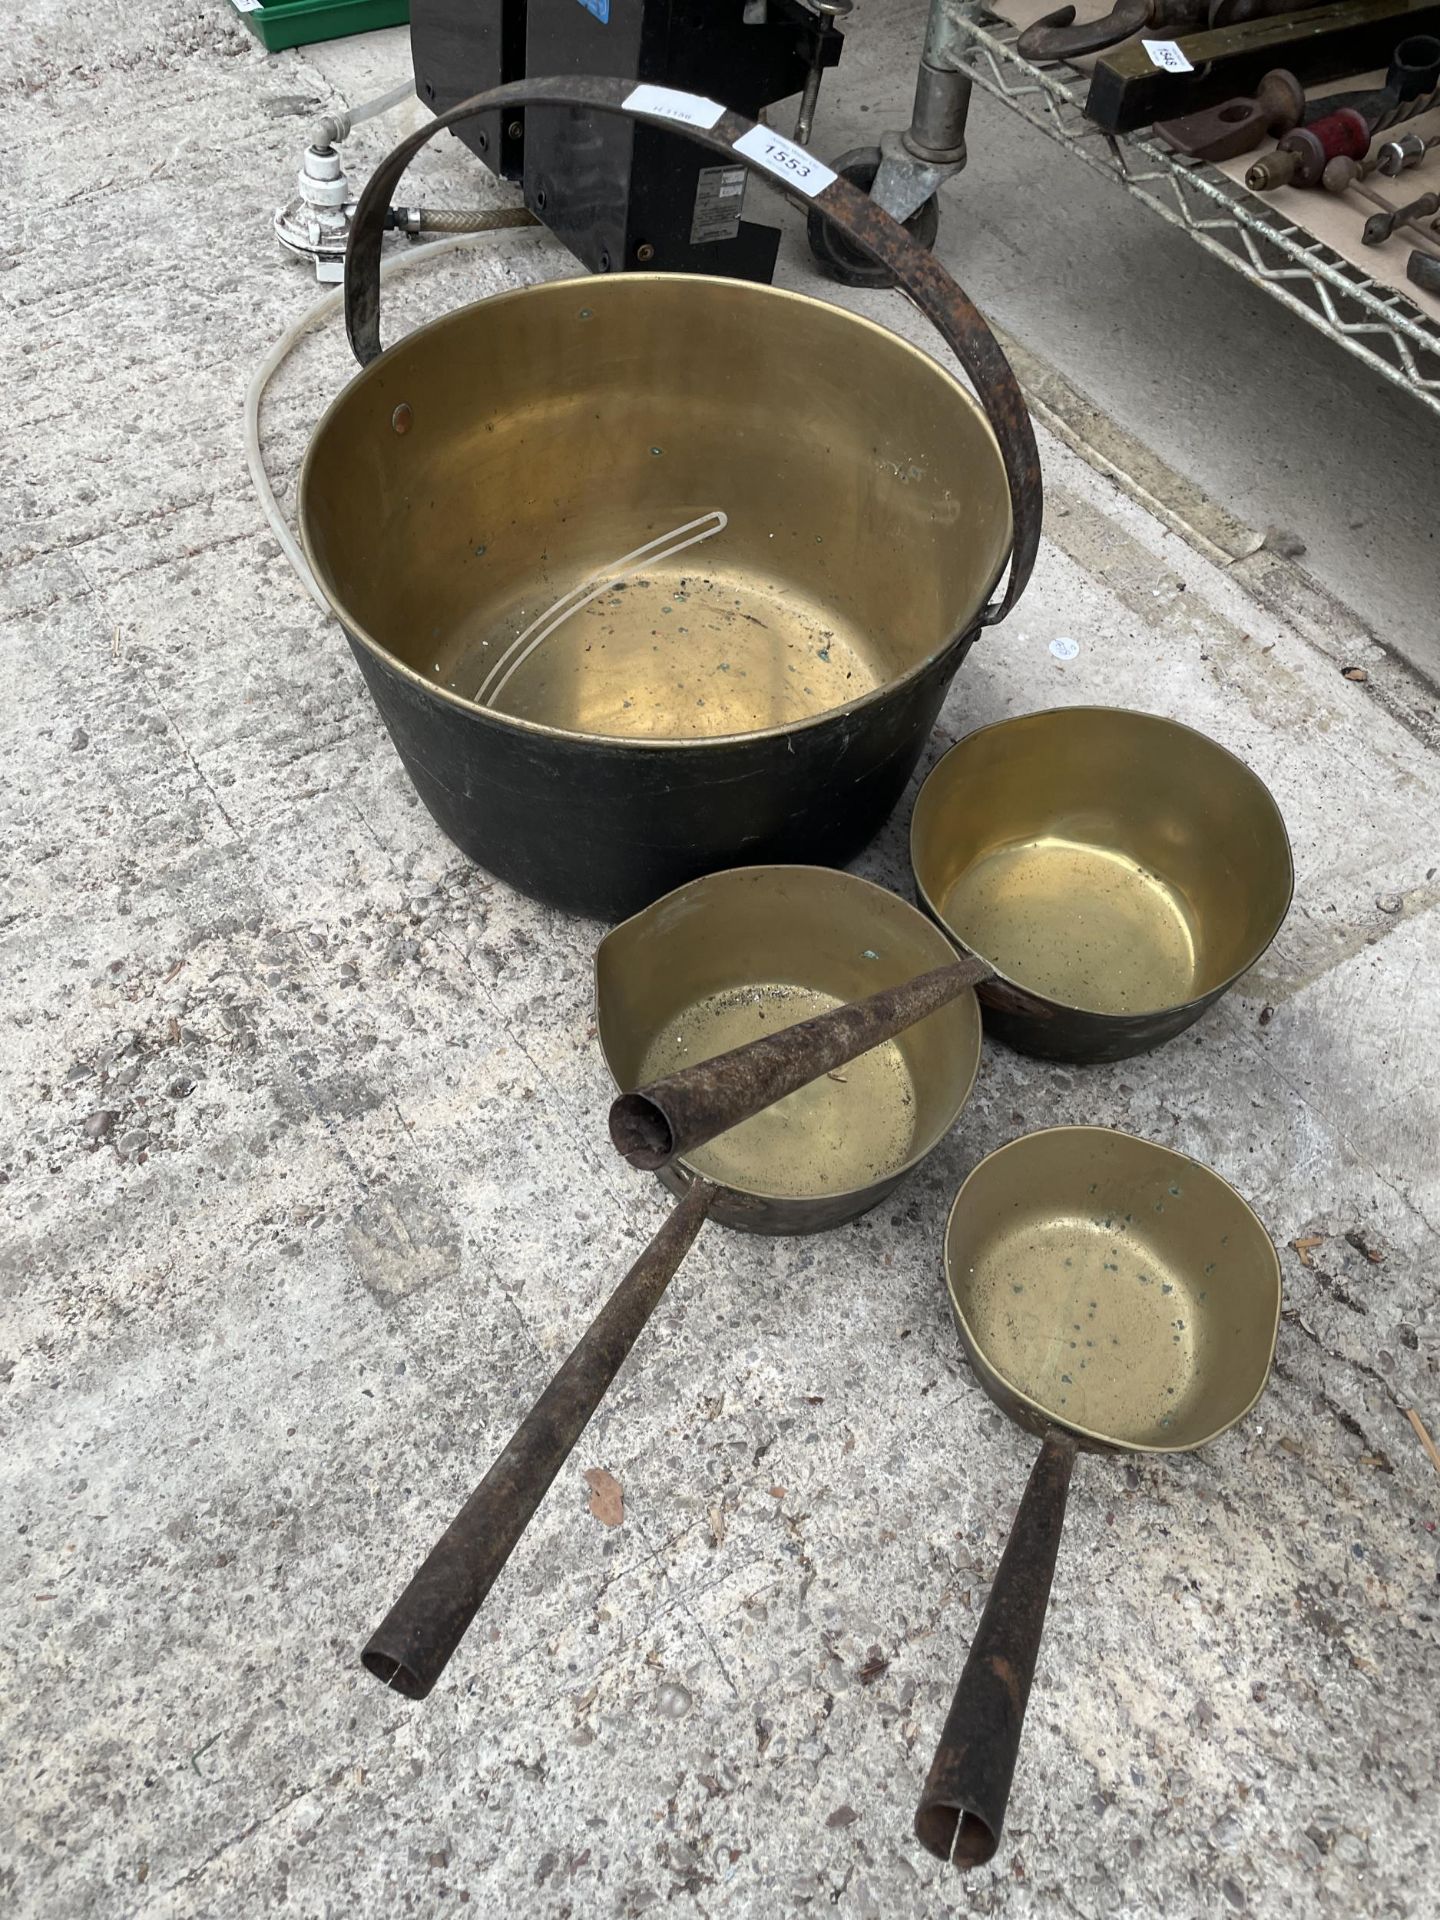 A LARGE BRASS JAM PAN AND THRE GRADUATED PANS WITH STEEL HANDLES